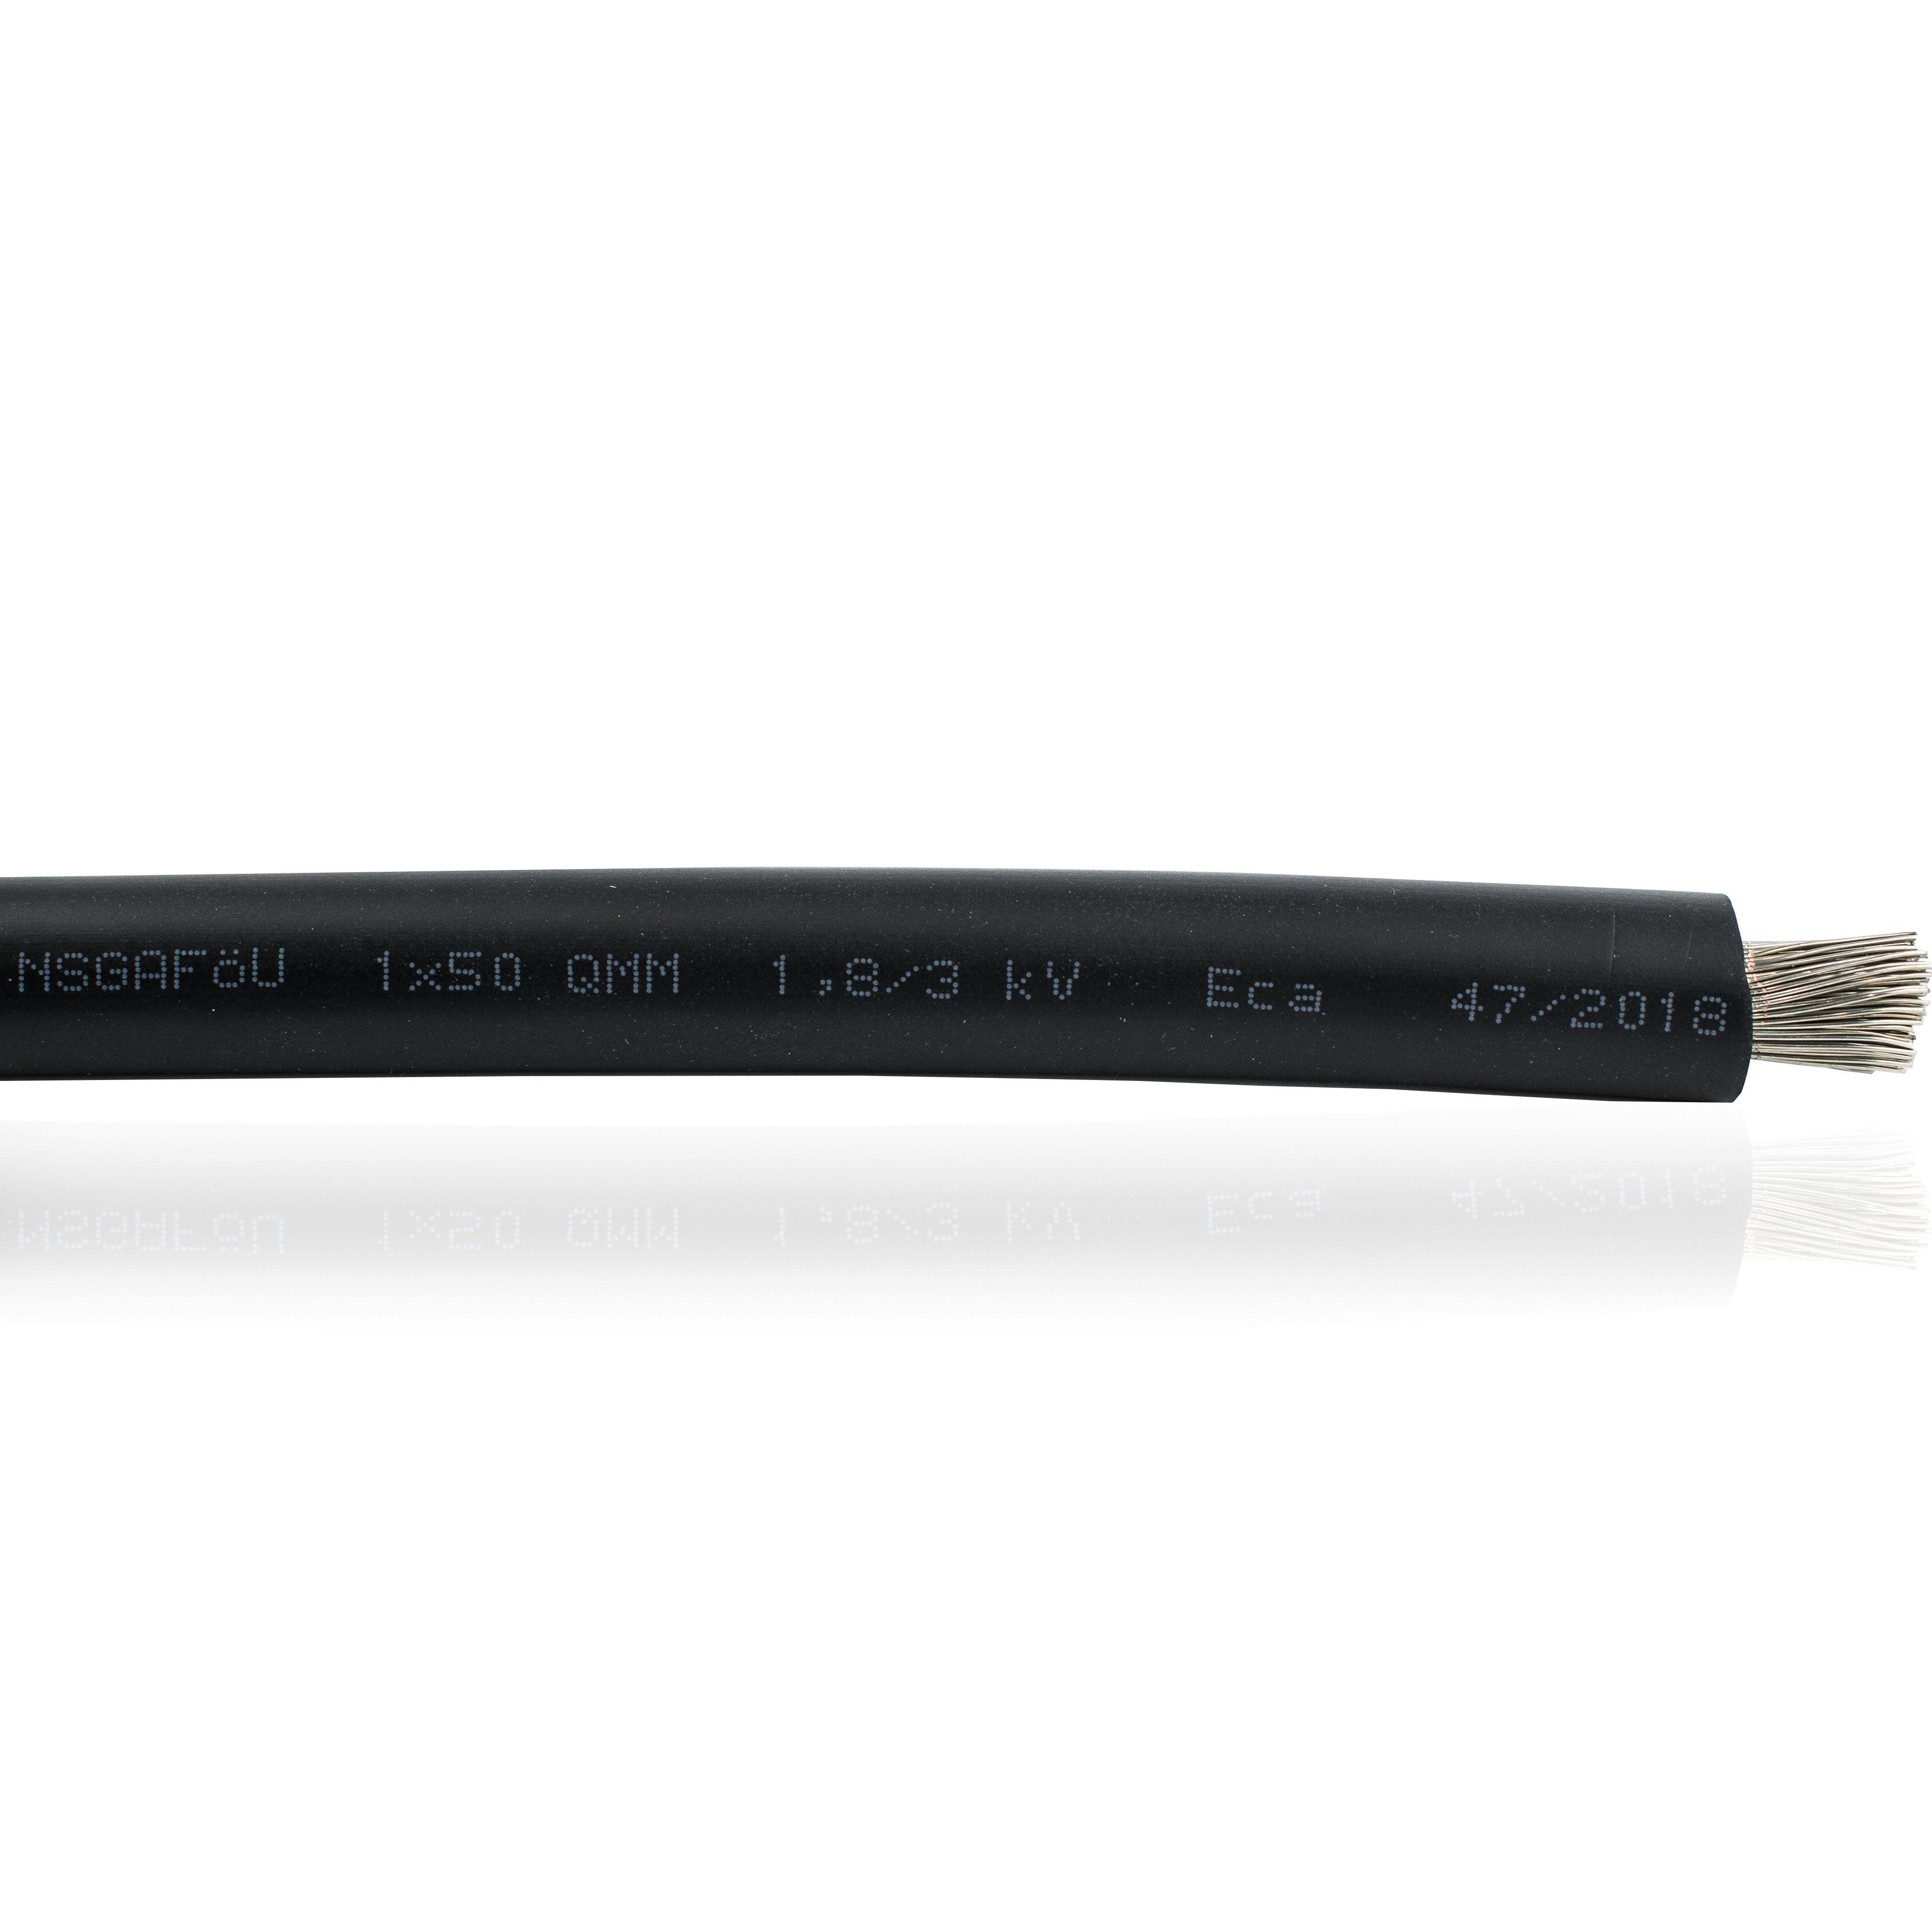 Helukabel 35mm² Battery Flexible Cables Double Insulated Price Per Meter - VoltaconSolar